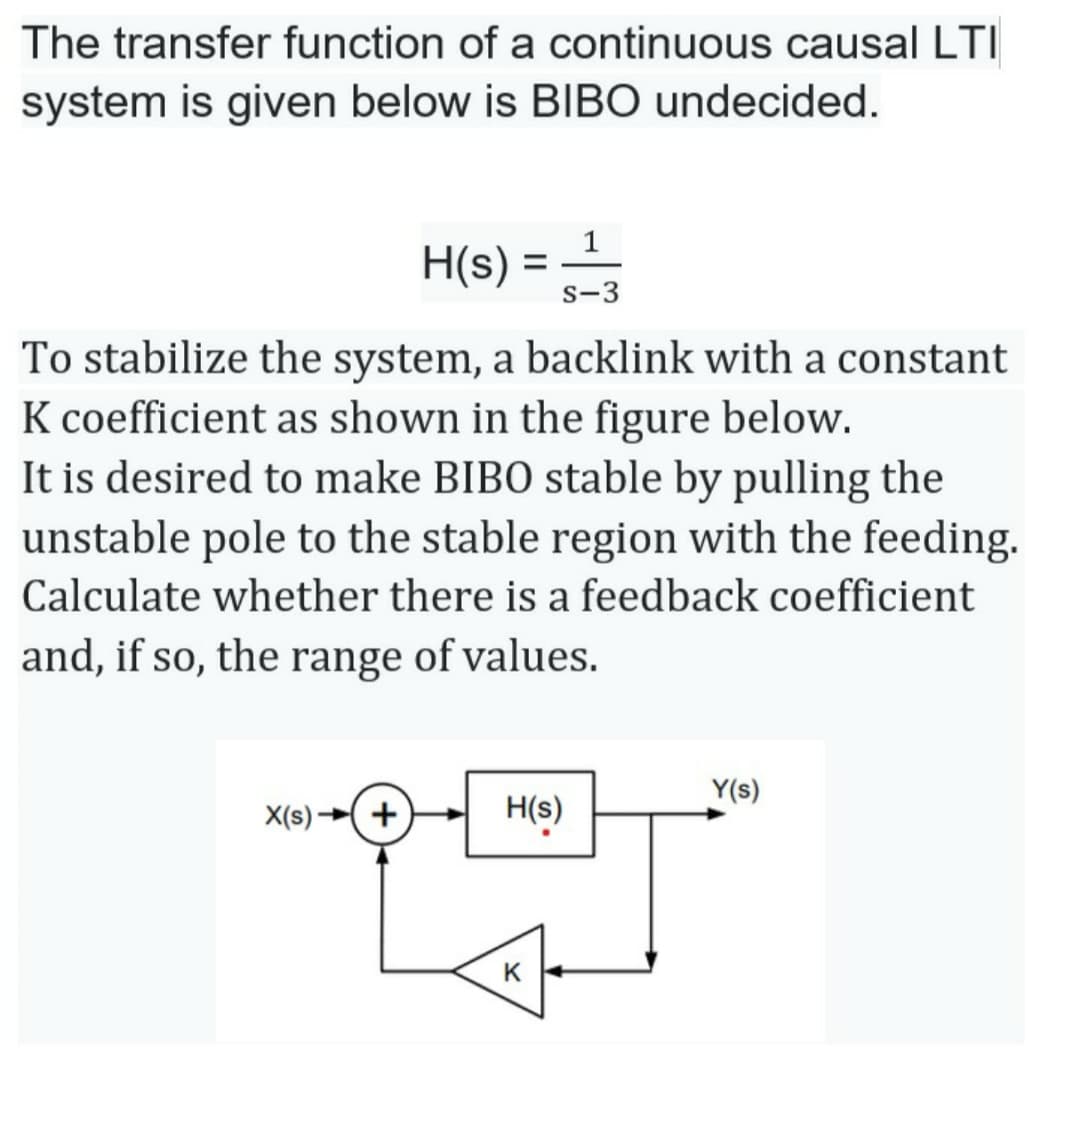 The transfer function of a continuous causal LTI
system is given below is BIBO undecided.
H(s) =
s-3
%3D
To stabilize the system, a backlink with a constant
K coefficient as shown in the figure below.
It is desired to make BIBO stable by pulling the
unstable pole to the stable region with the feeding.
Calculate whether there is a feedback coefficient
and, if so, the range of values.
Y(s)
X(s)
+
H(s)
K
